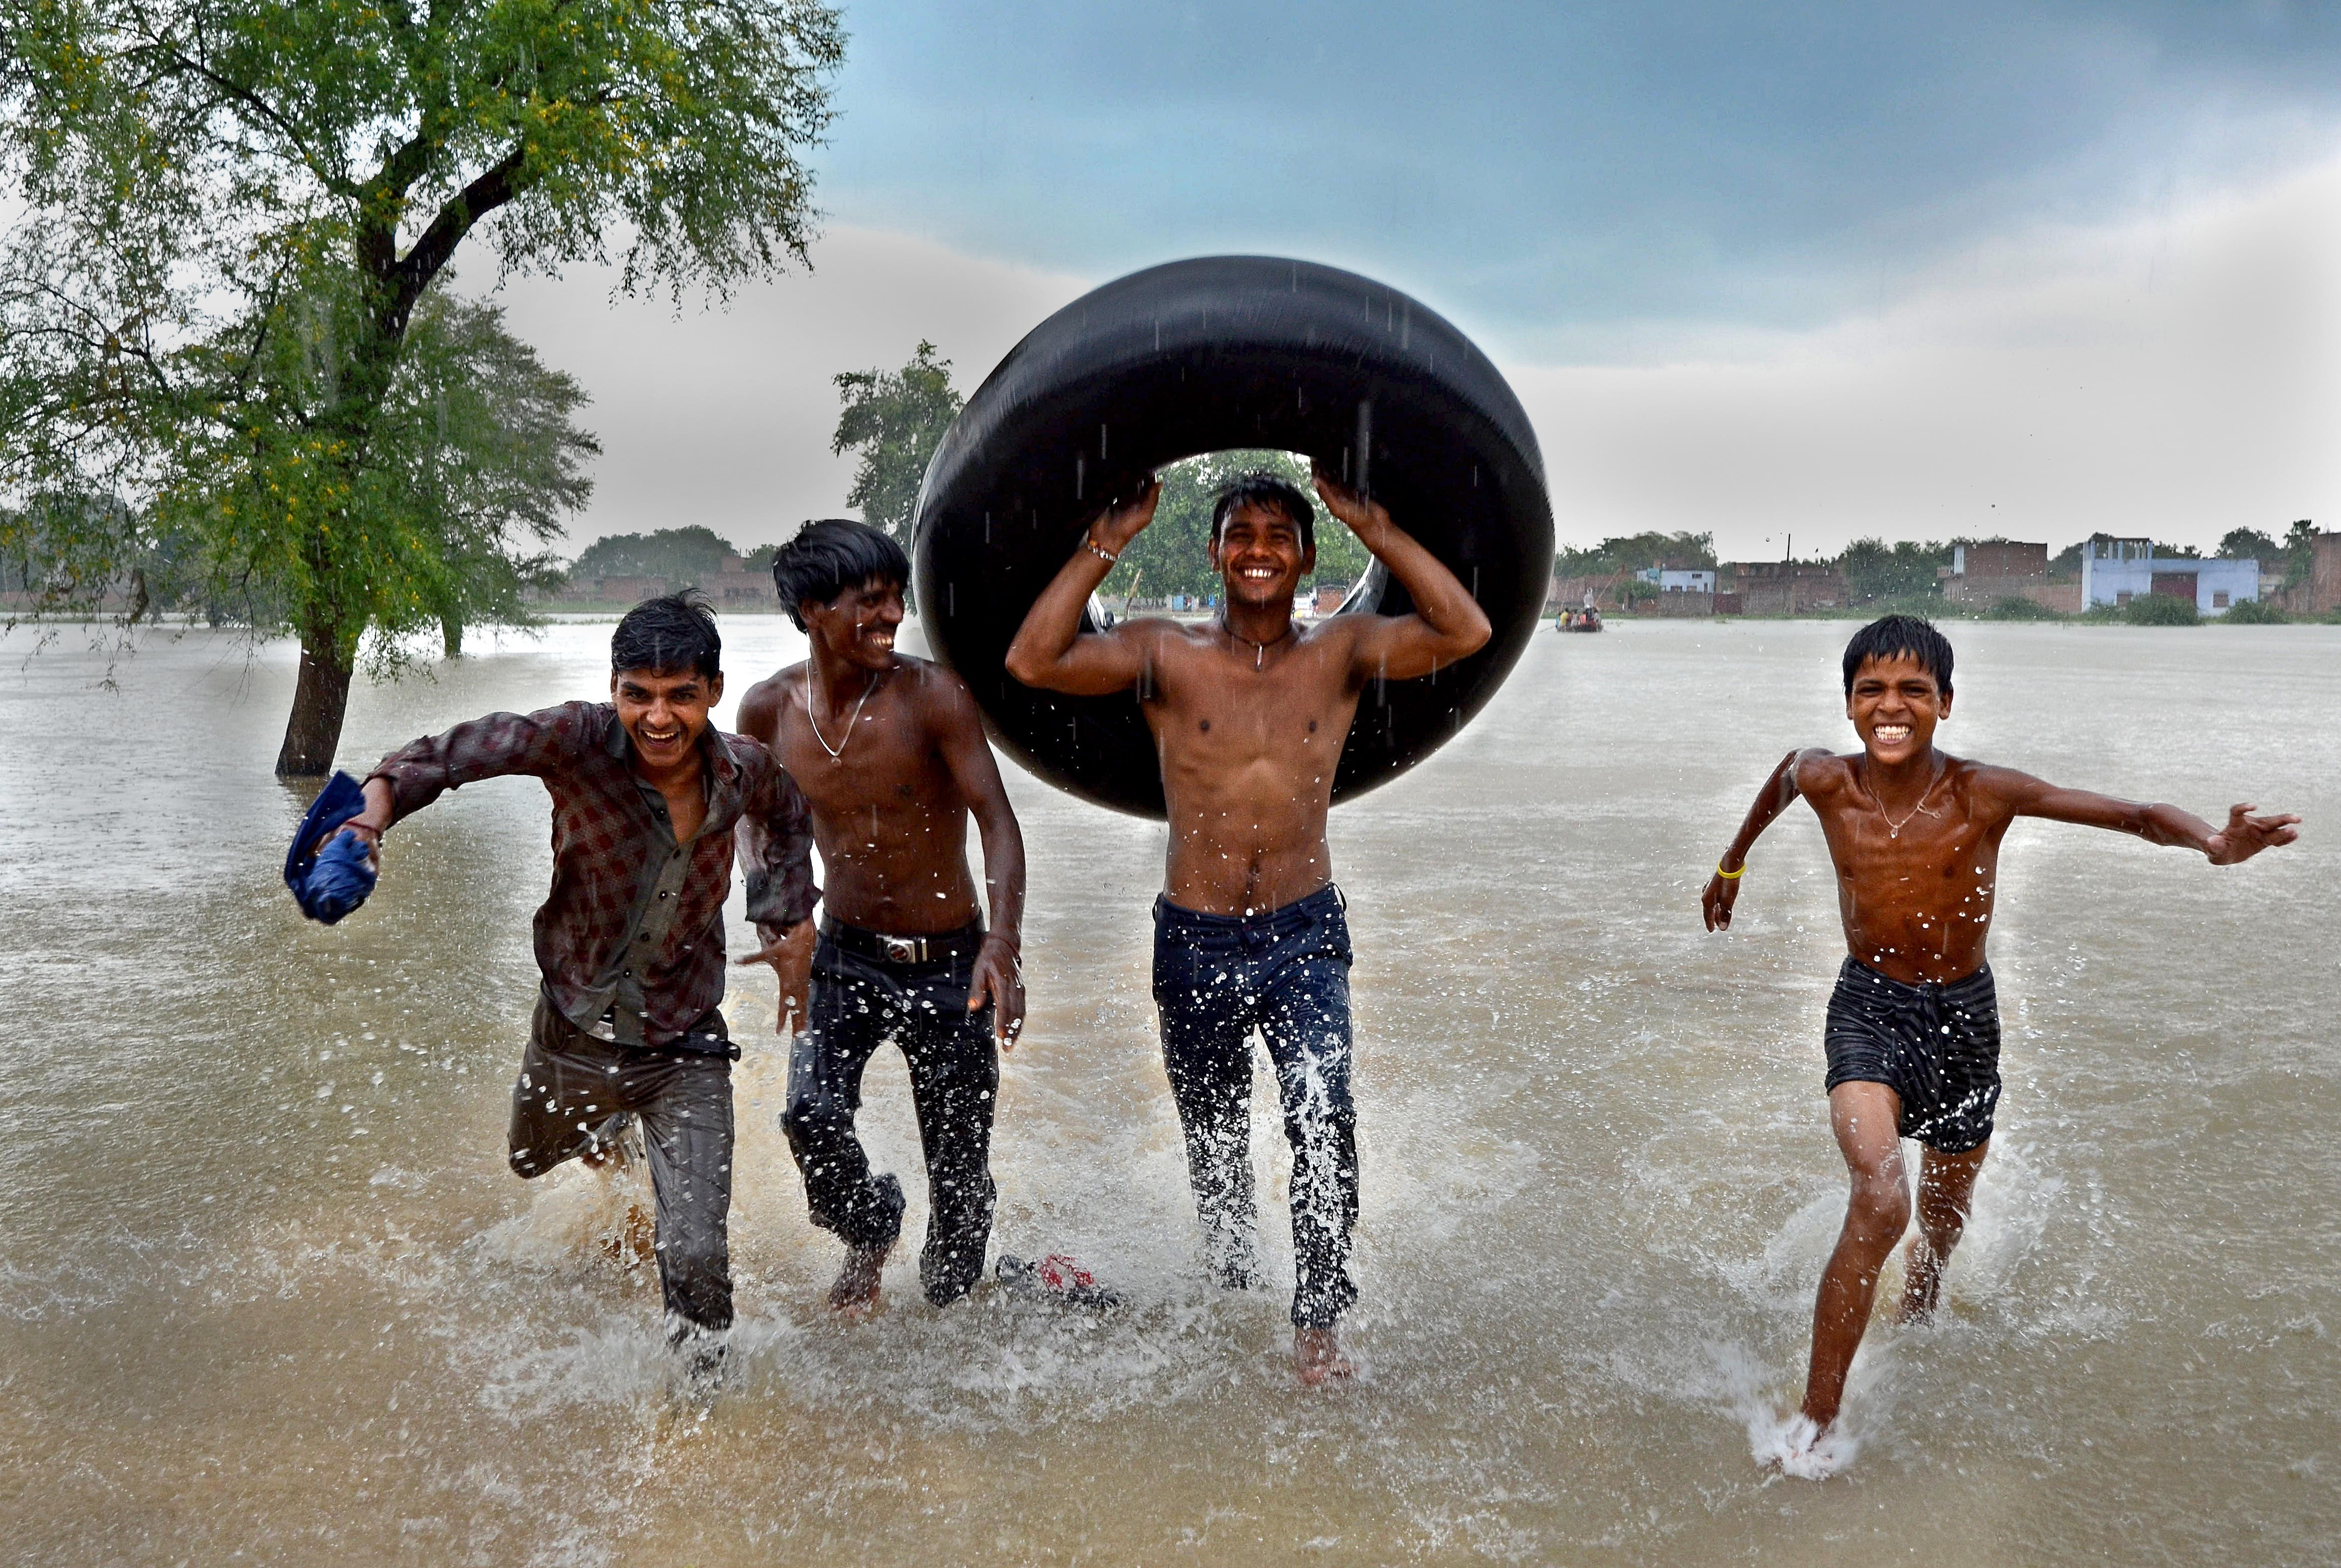 Monsoon season in India is an ideal time to visit. There are fewer tourists, cheaper deals and life is more relaxed. Photo: Alamy